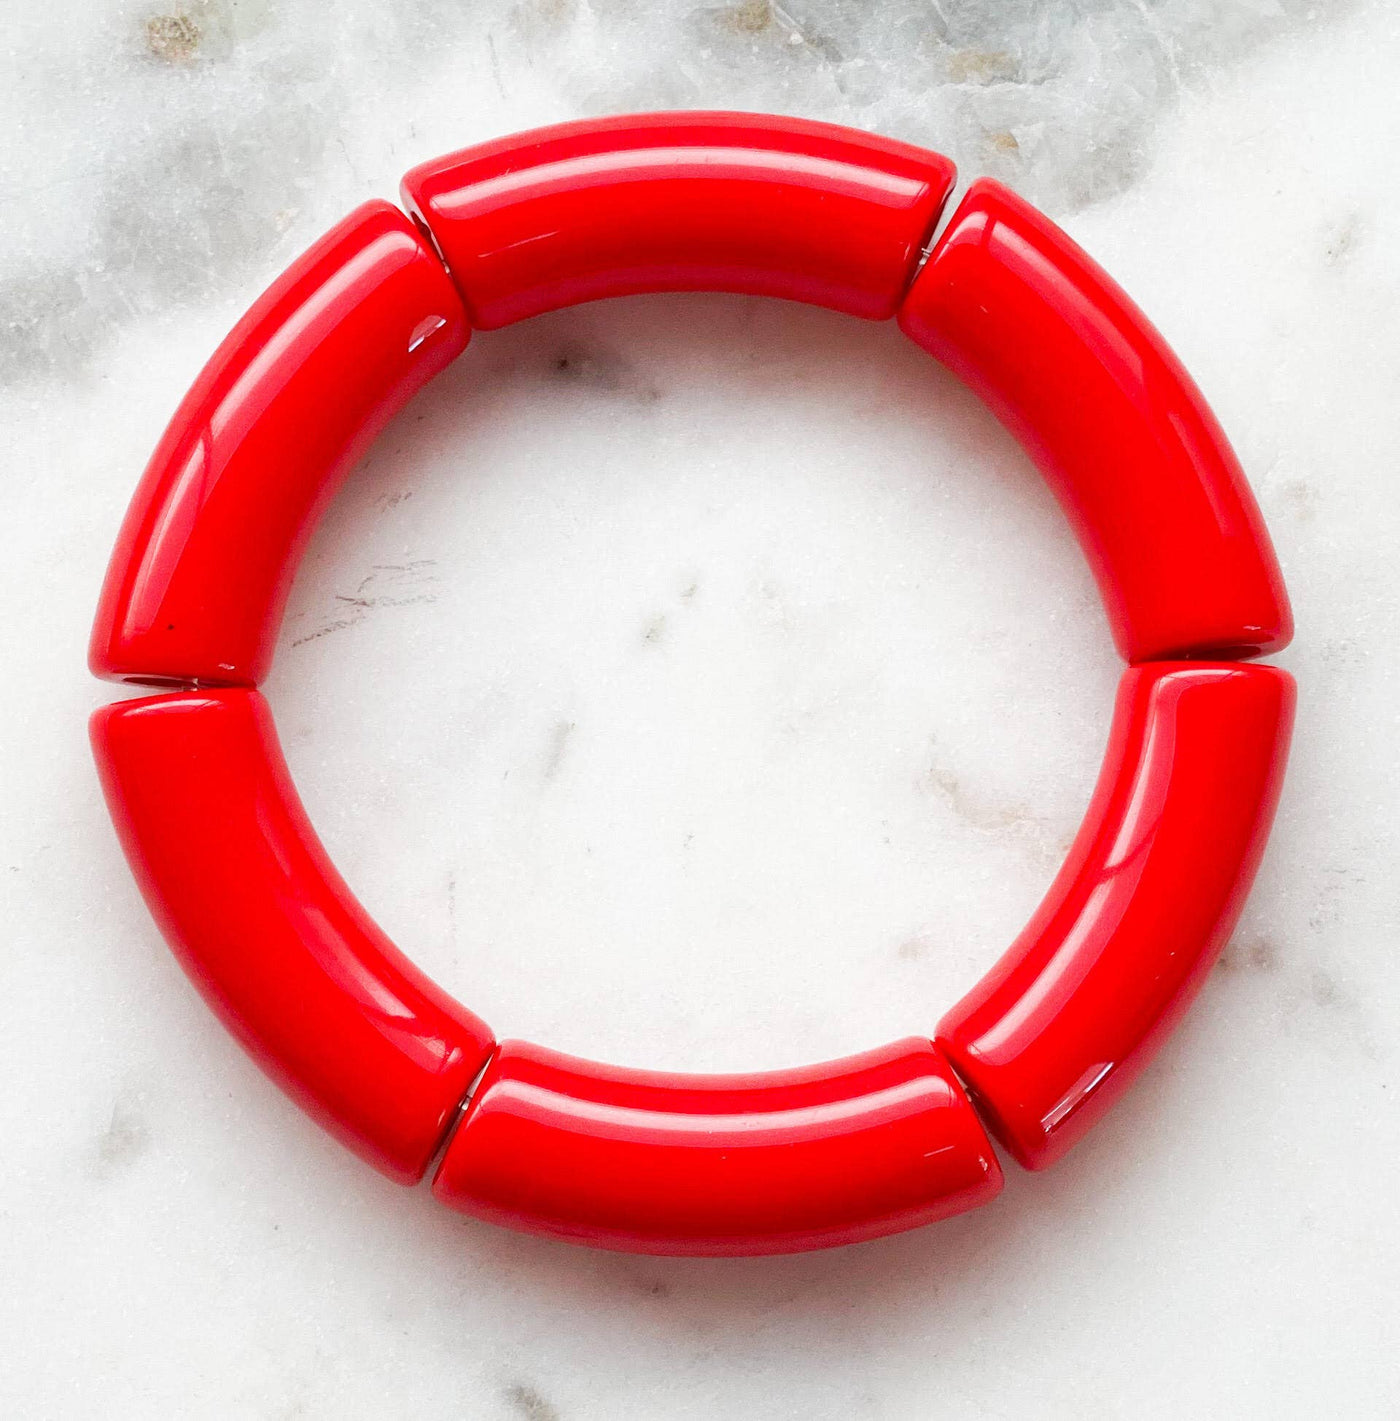 Acrylic Bamboo Bangle Bracelet "Red": 7 inch / Solid